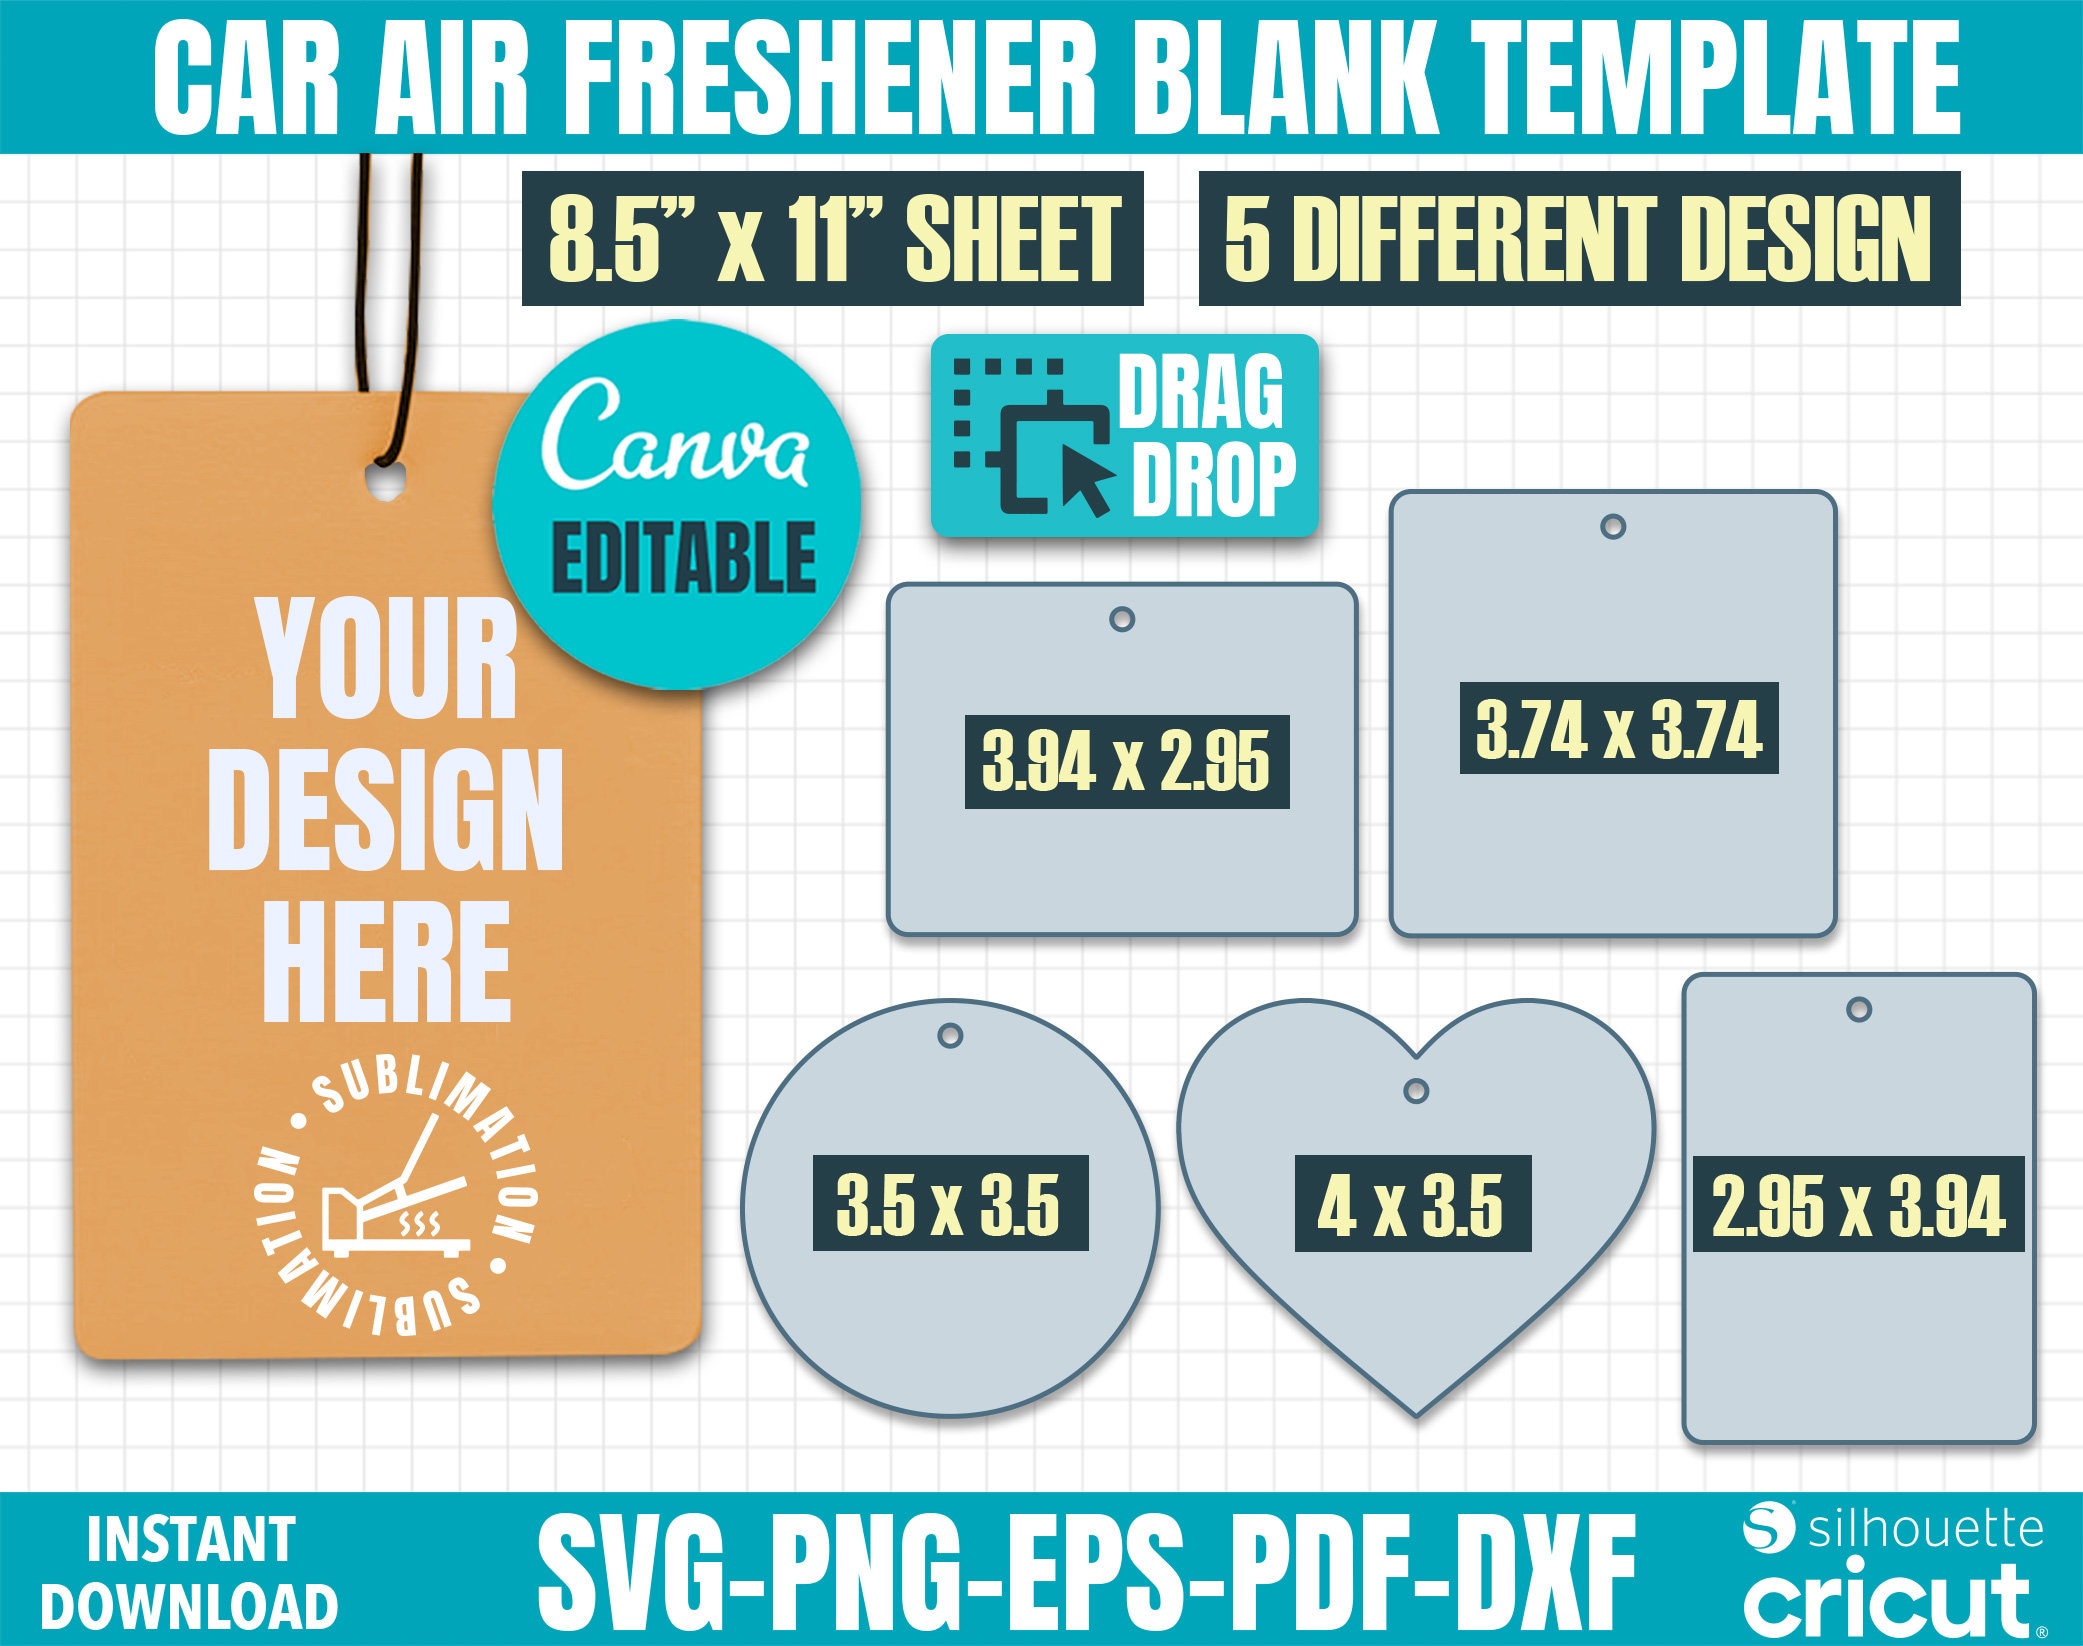 2.75 X 4 Car Air Freshener, Blank Air Freshener Template, Sublimation, SVG,  Canva, DXF, Ms Word Docx, Png, Psd, 8.5x11 Sheet, Printable 